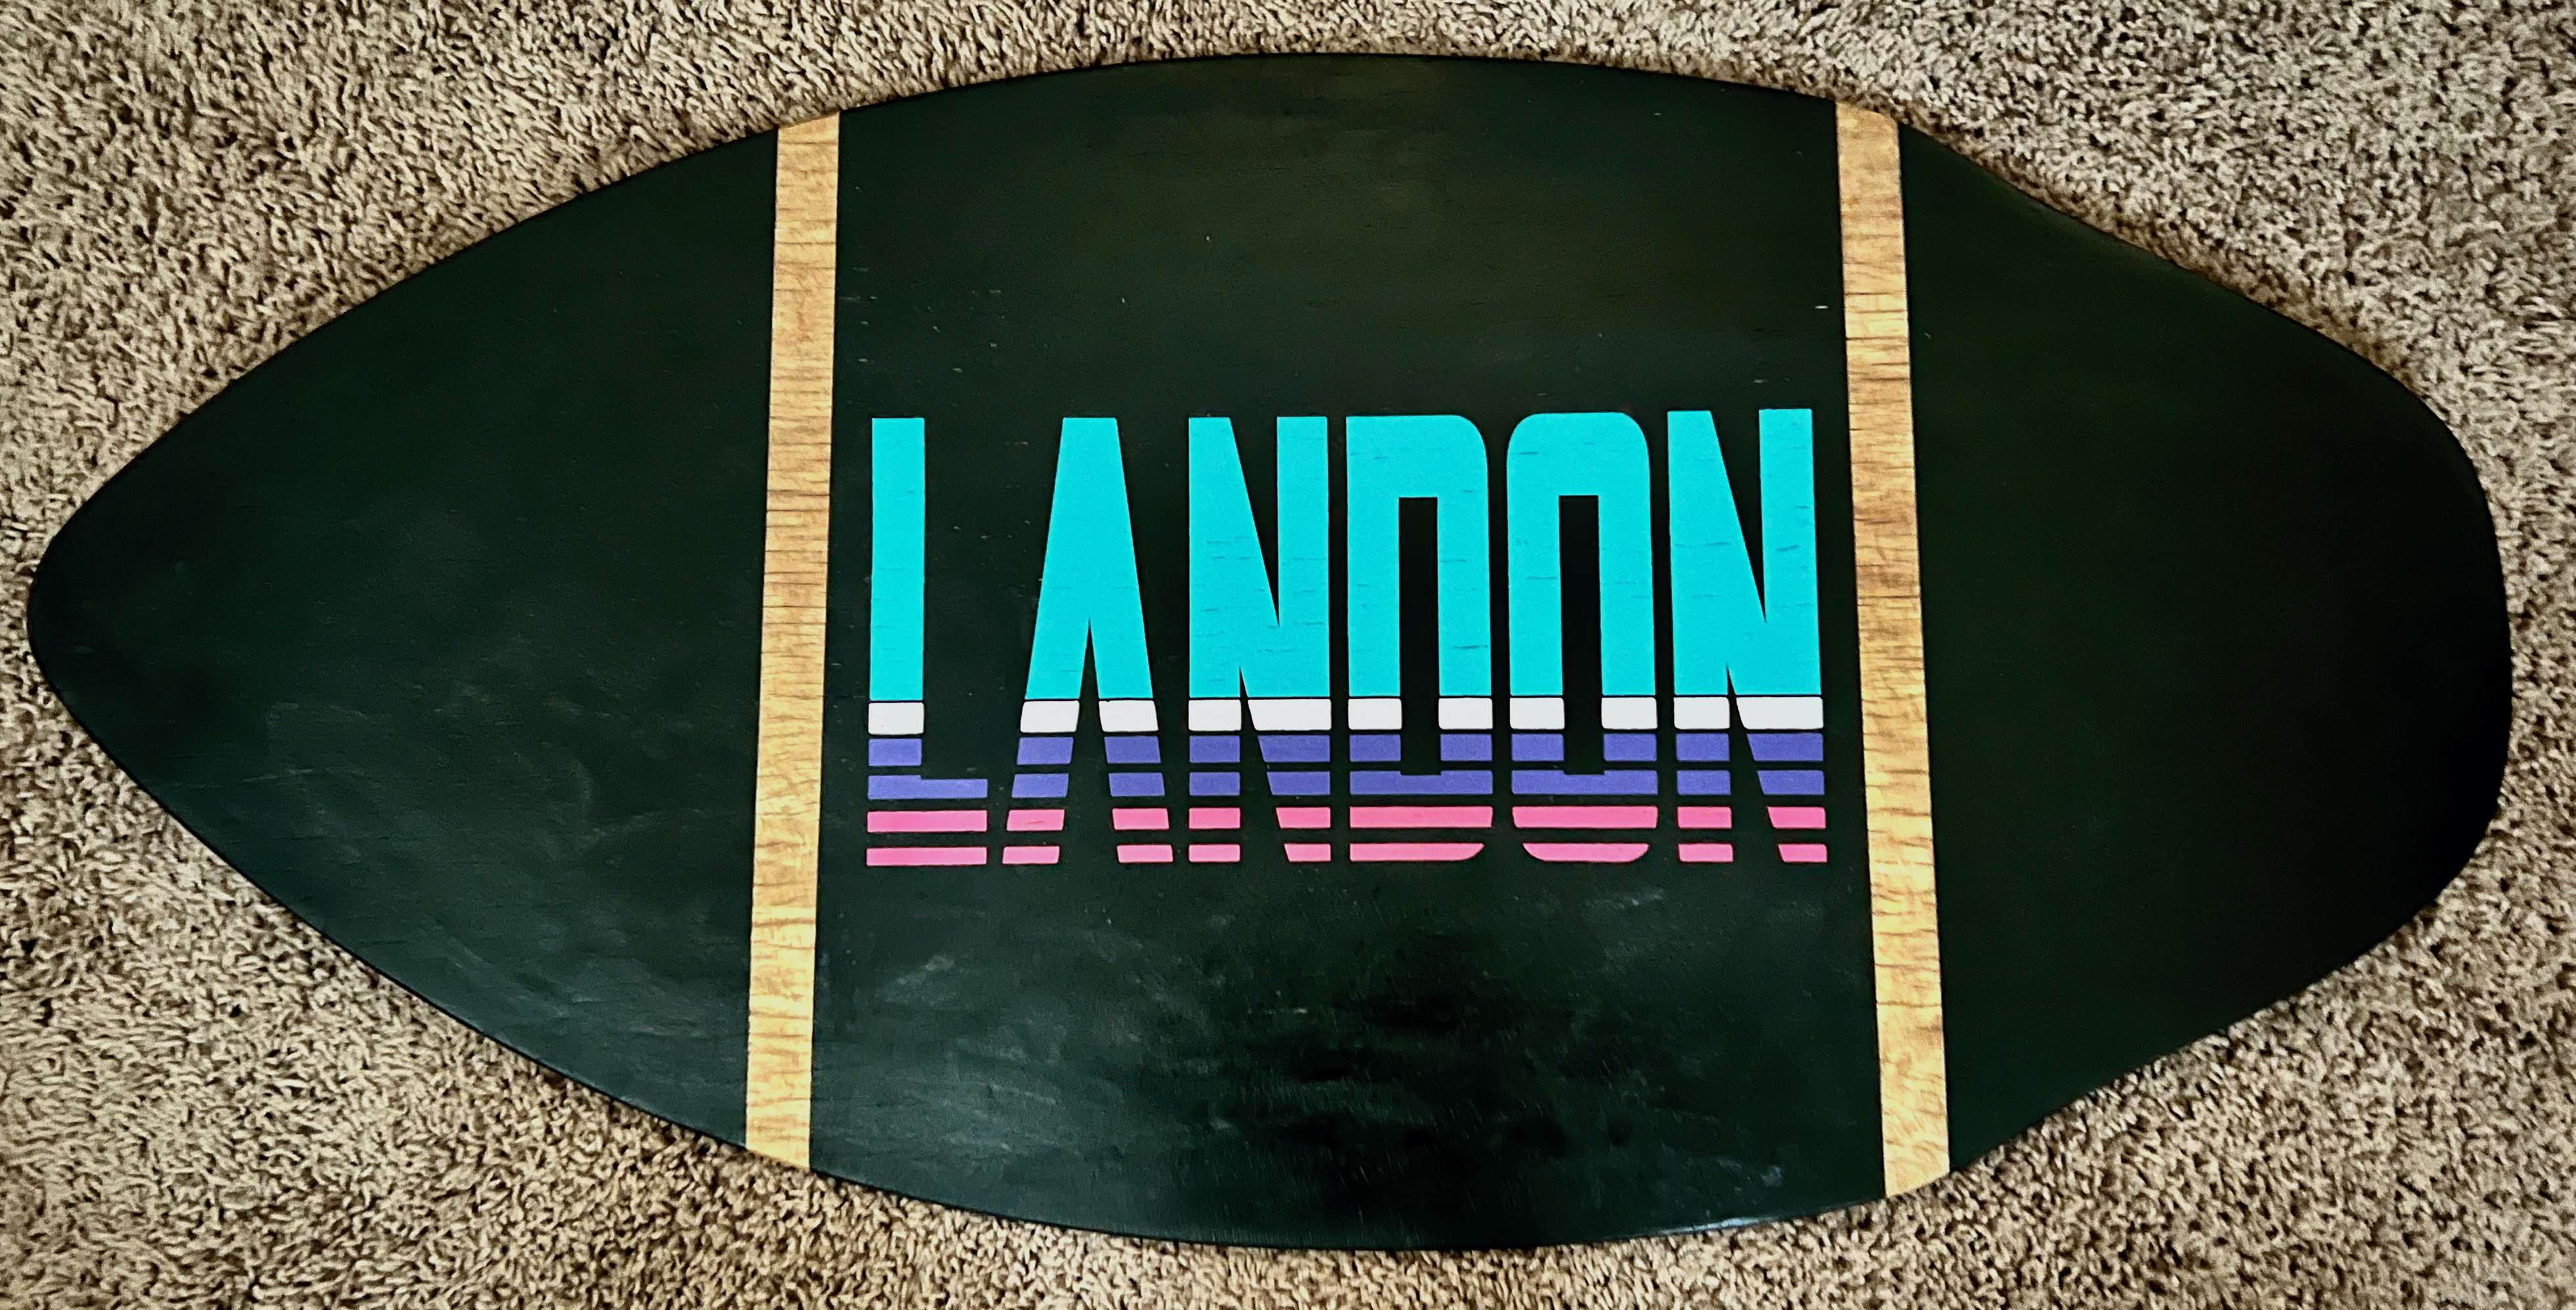 A photo of a skimboard with the name Landon painted on it.